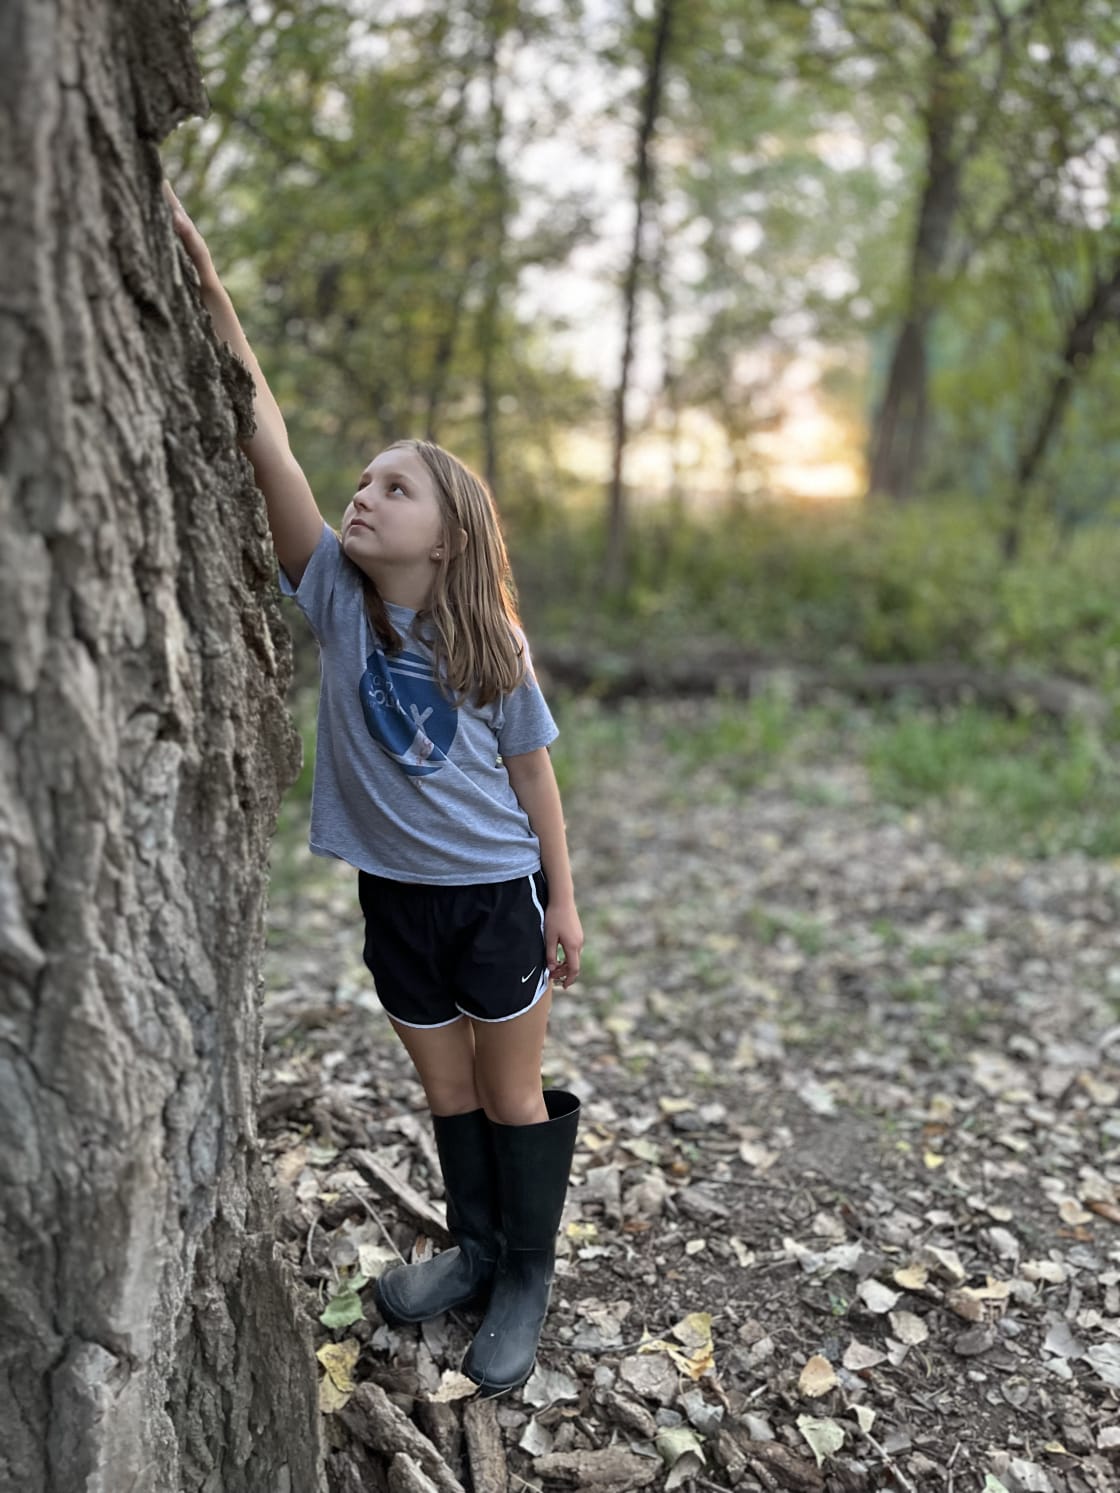 We love to provide opportunities for kids to connect to nature!